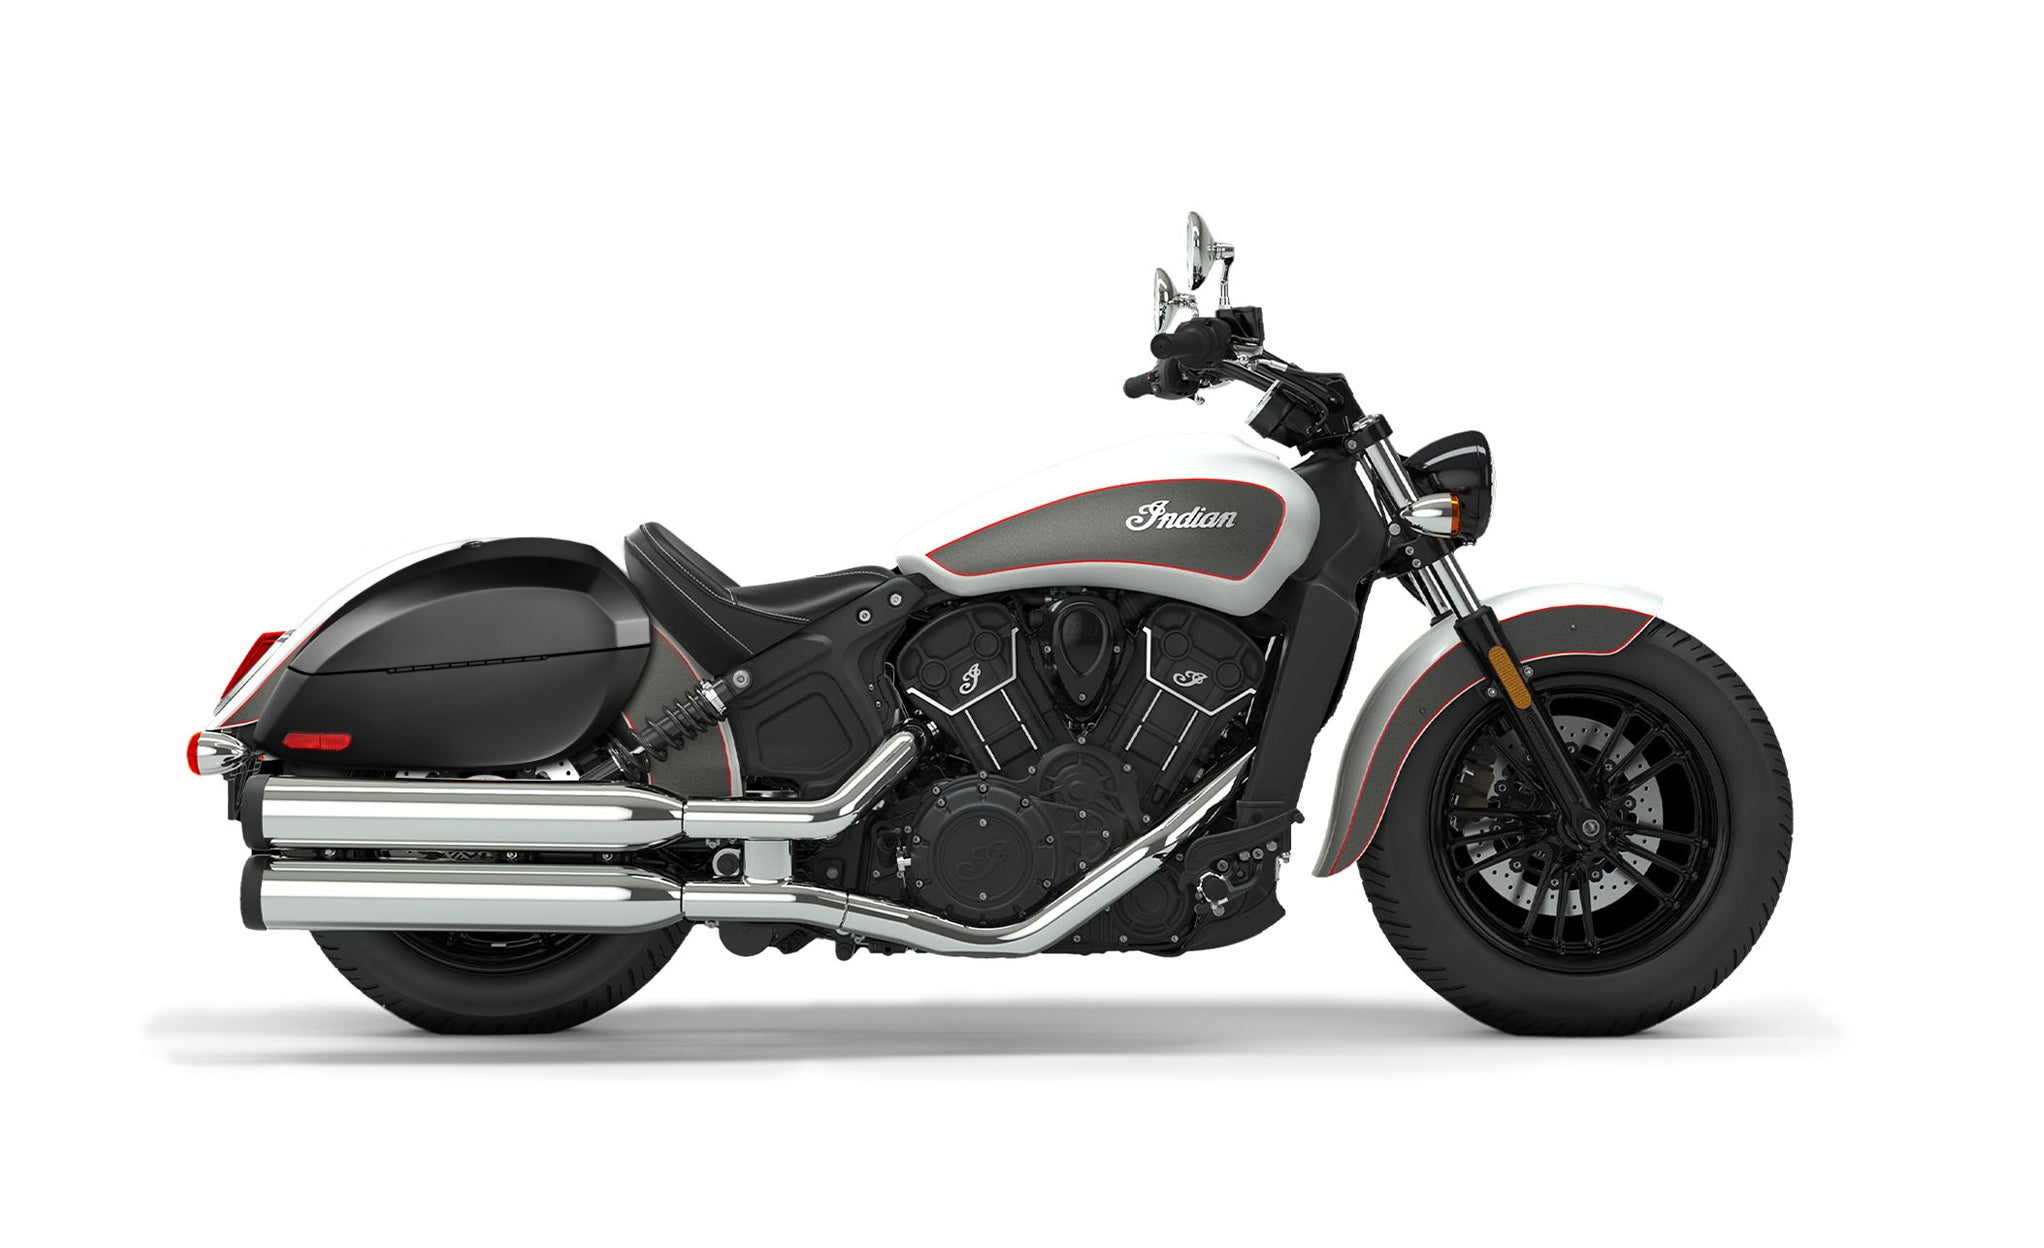 Viking Phantom Large Indian Scout Sixty Matte Motorcycle Hard Saddlebags Engineering Excellence with Bag on Bike @expand